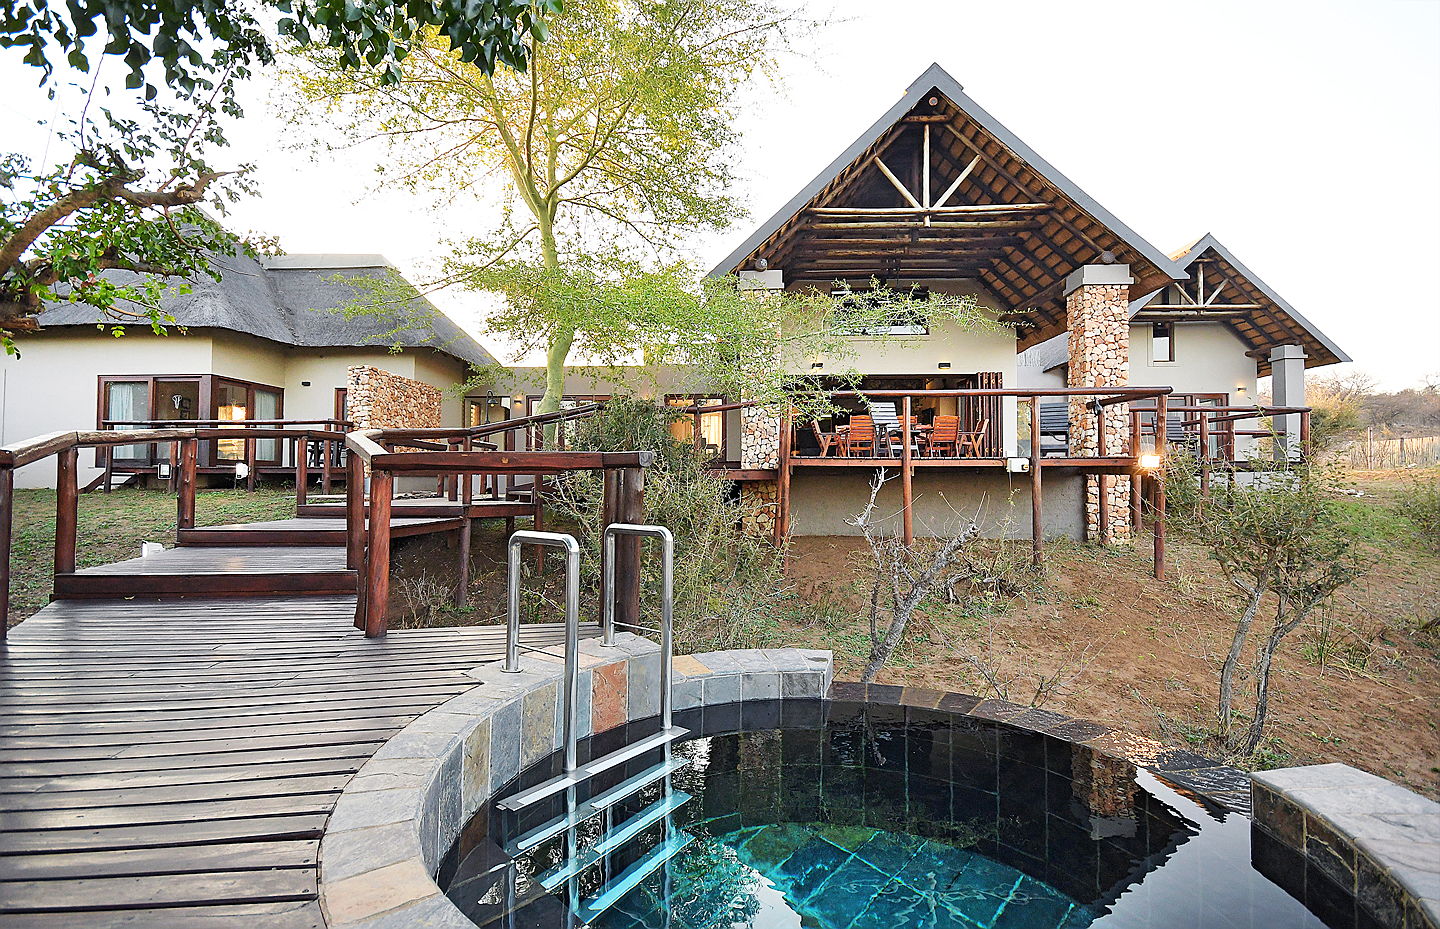  Hoedspruit
- Property for sale in Grietjie Private Game Reserve